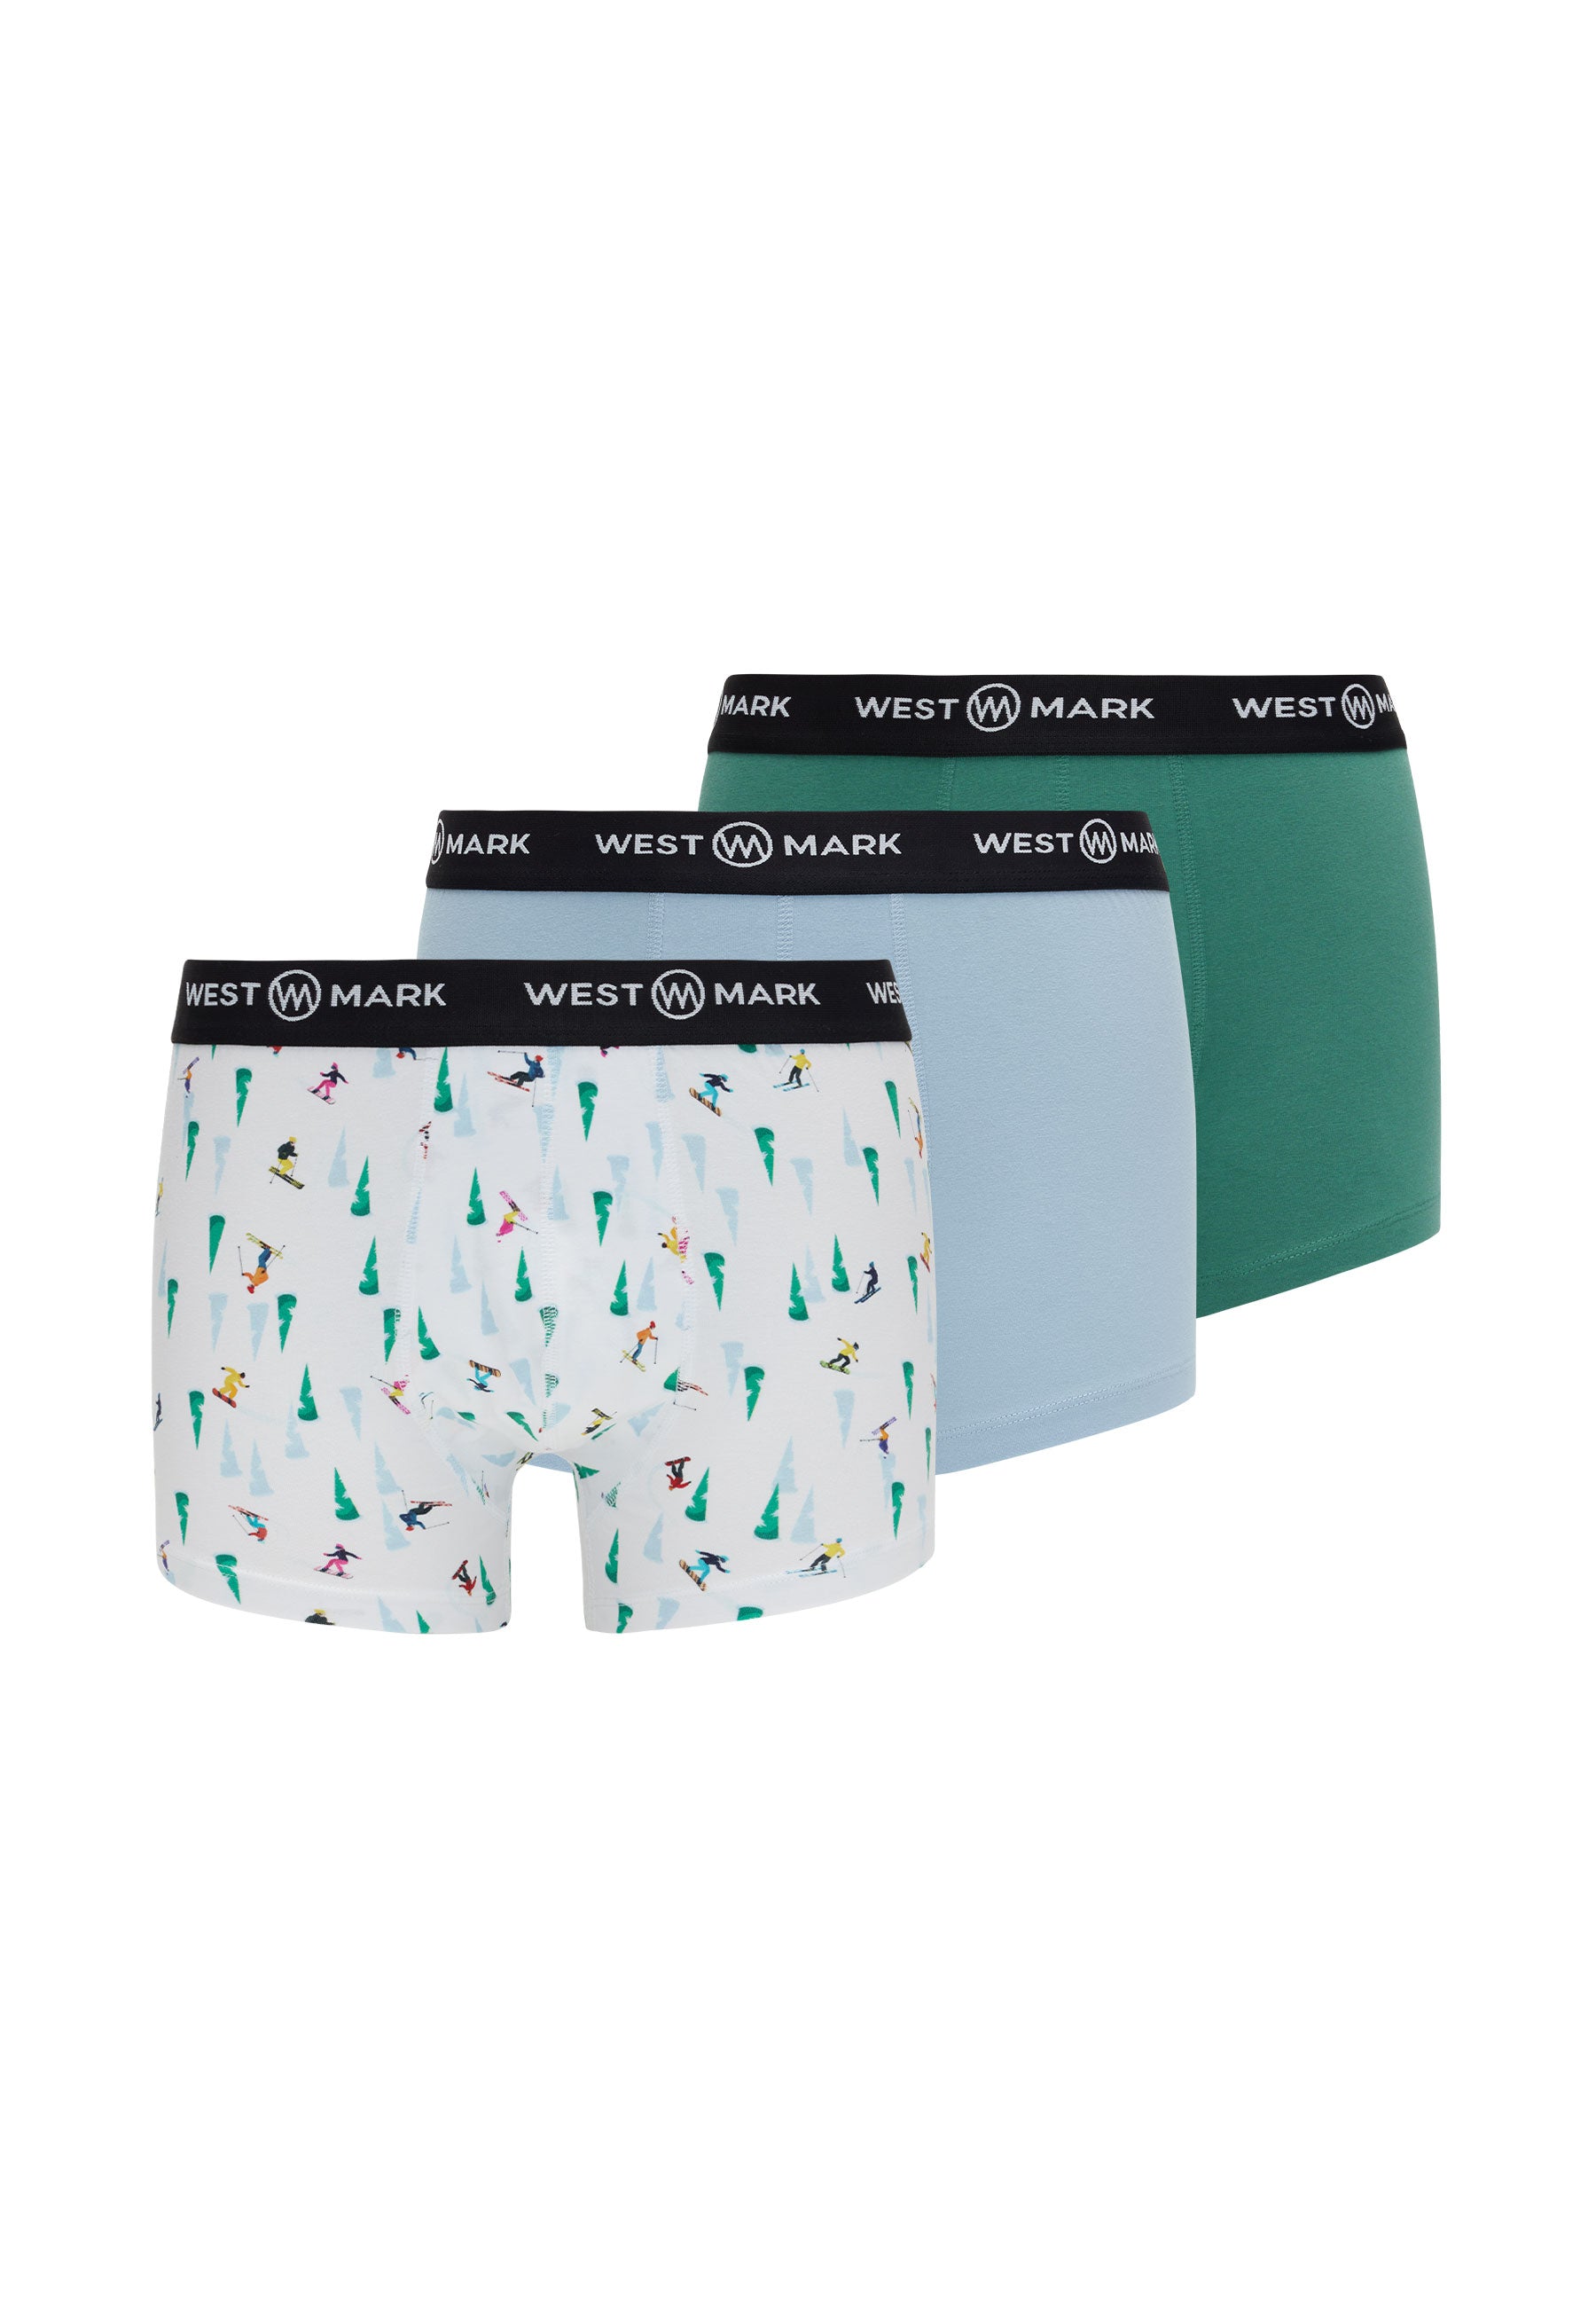 OSCAR 3-PACK WINTER ICONS in Green, Blue